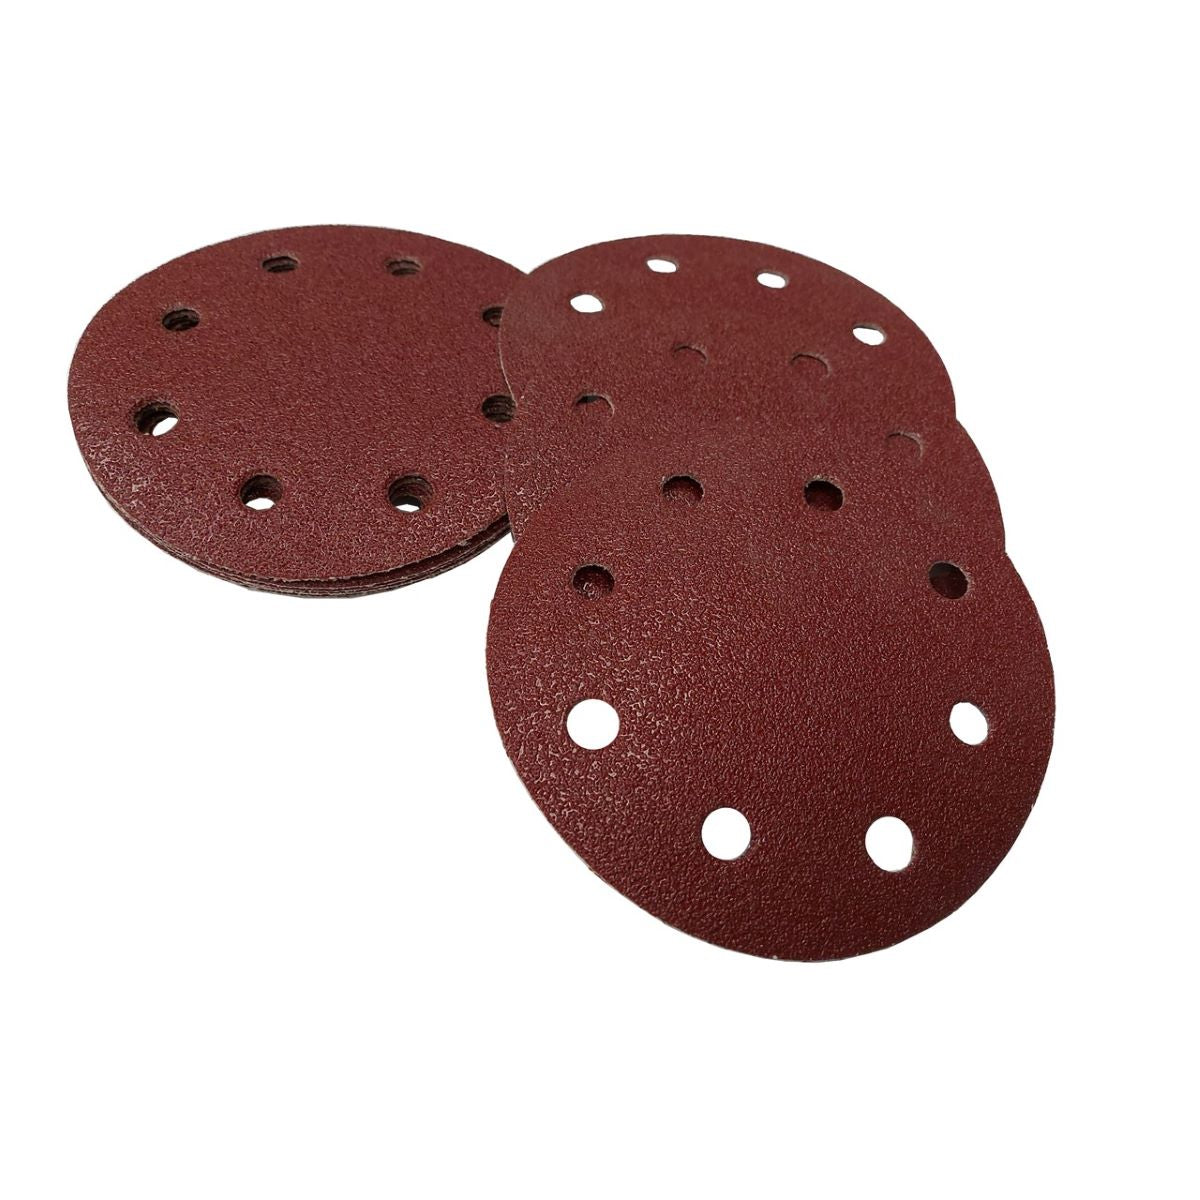 6" 8 Hole (Outer Edge) Red Aluminum Oxide Resin Hook Paper (Velcro) - per 100